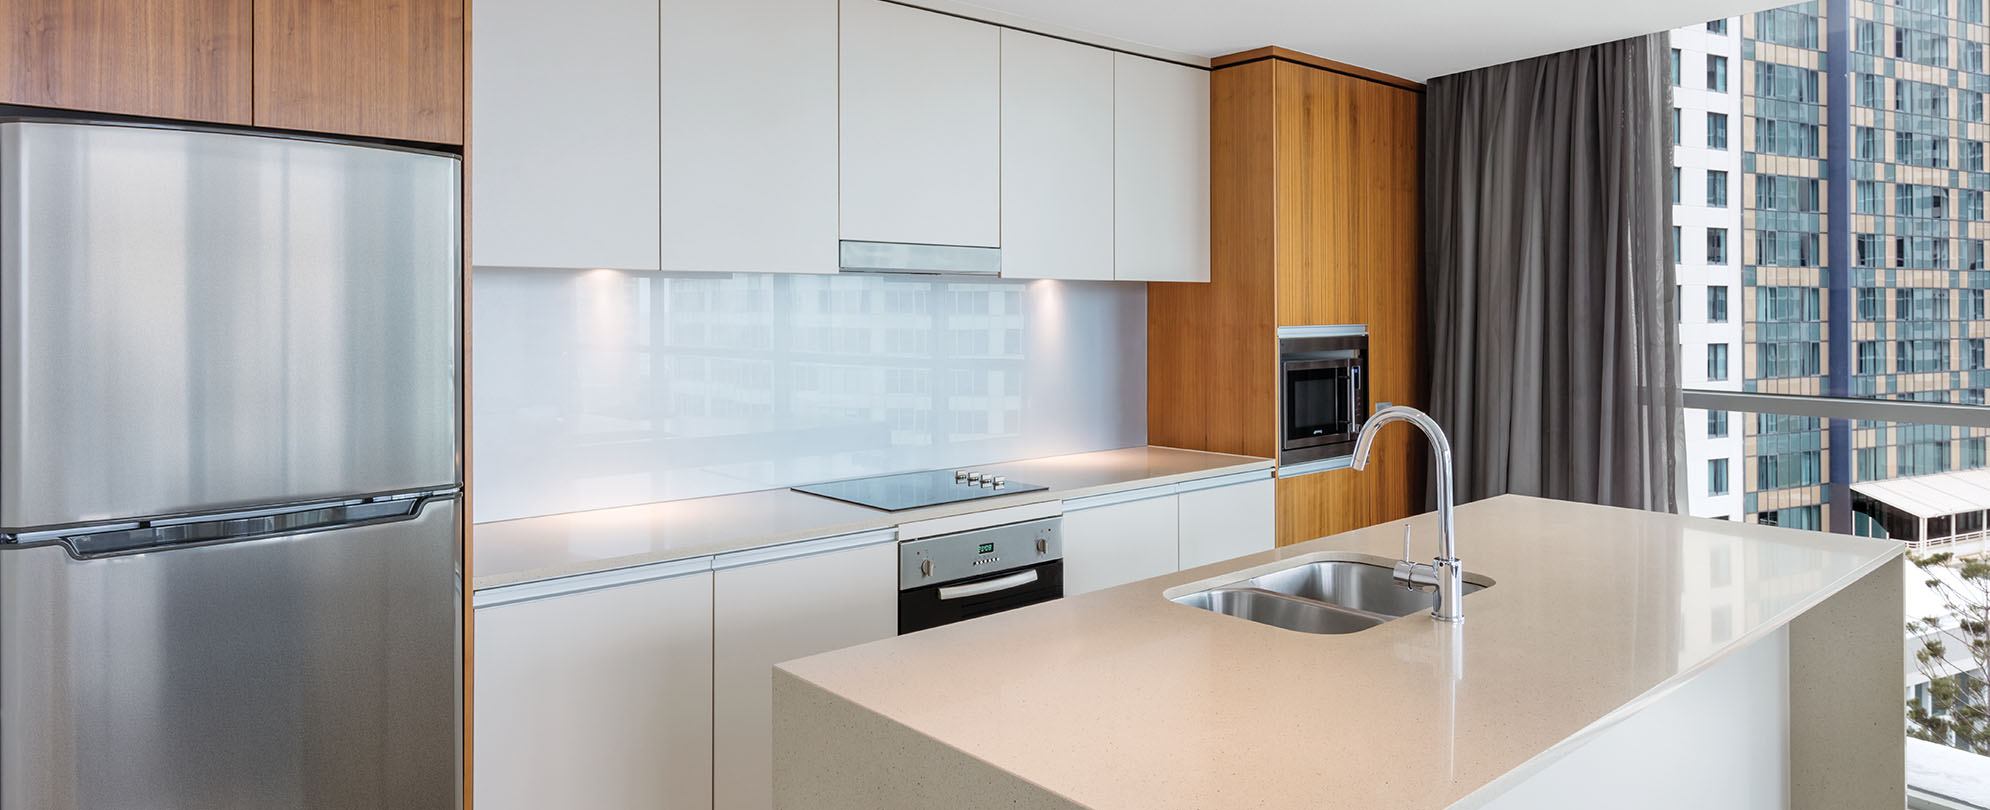 The kitchen of a 2-bedroom suite at Club Wyndham Surfers Paradise.